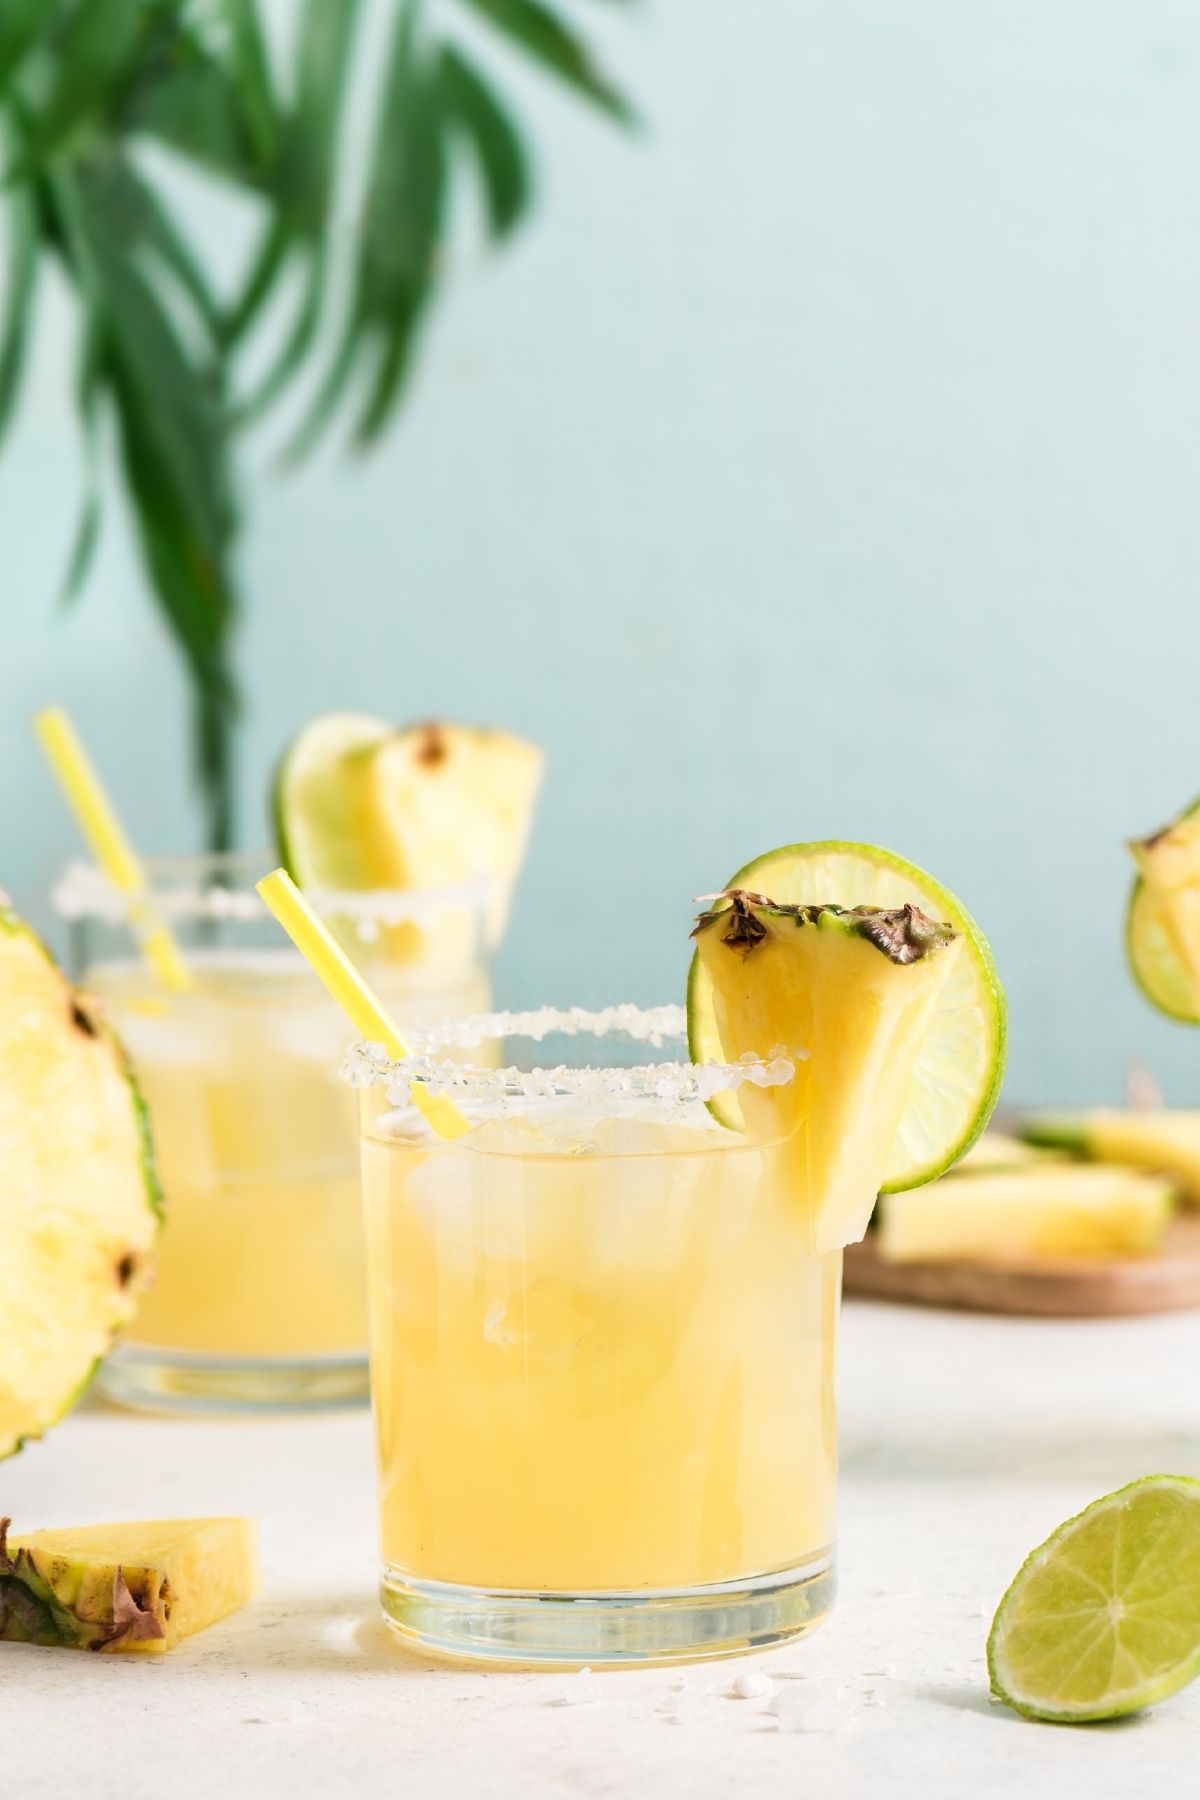 Acapulco (Pineapple Tequila Cocktail)